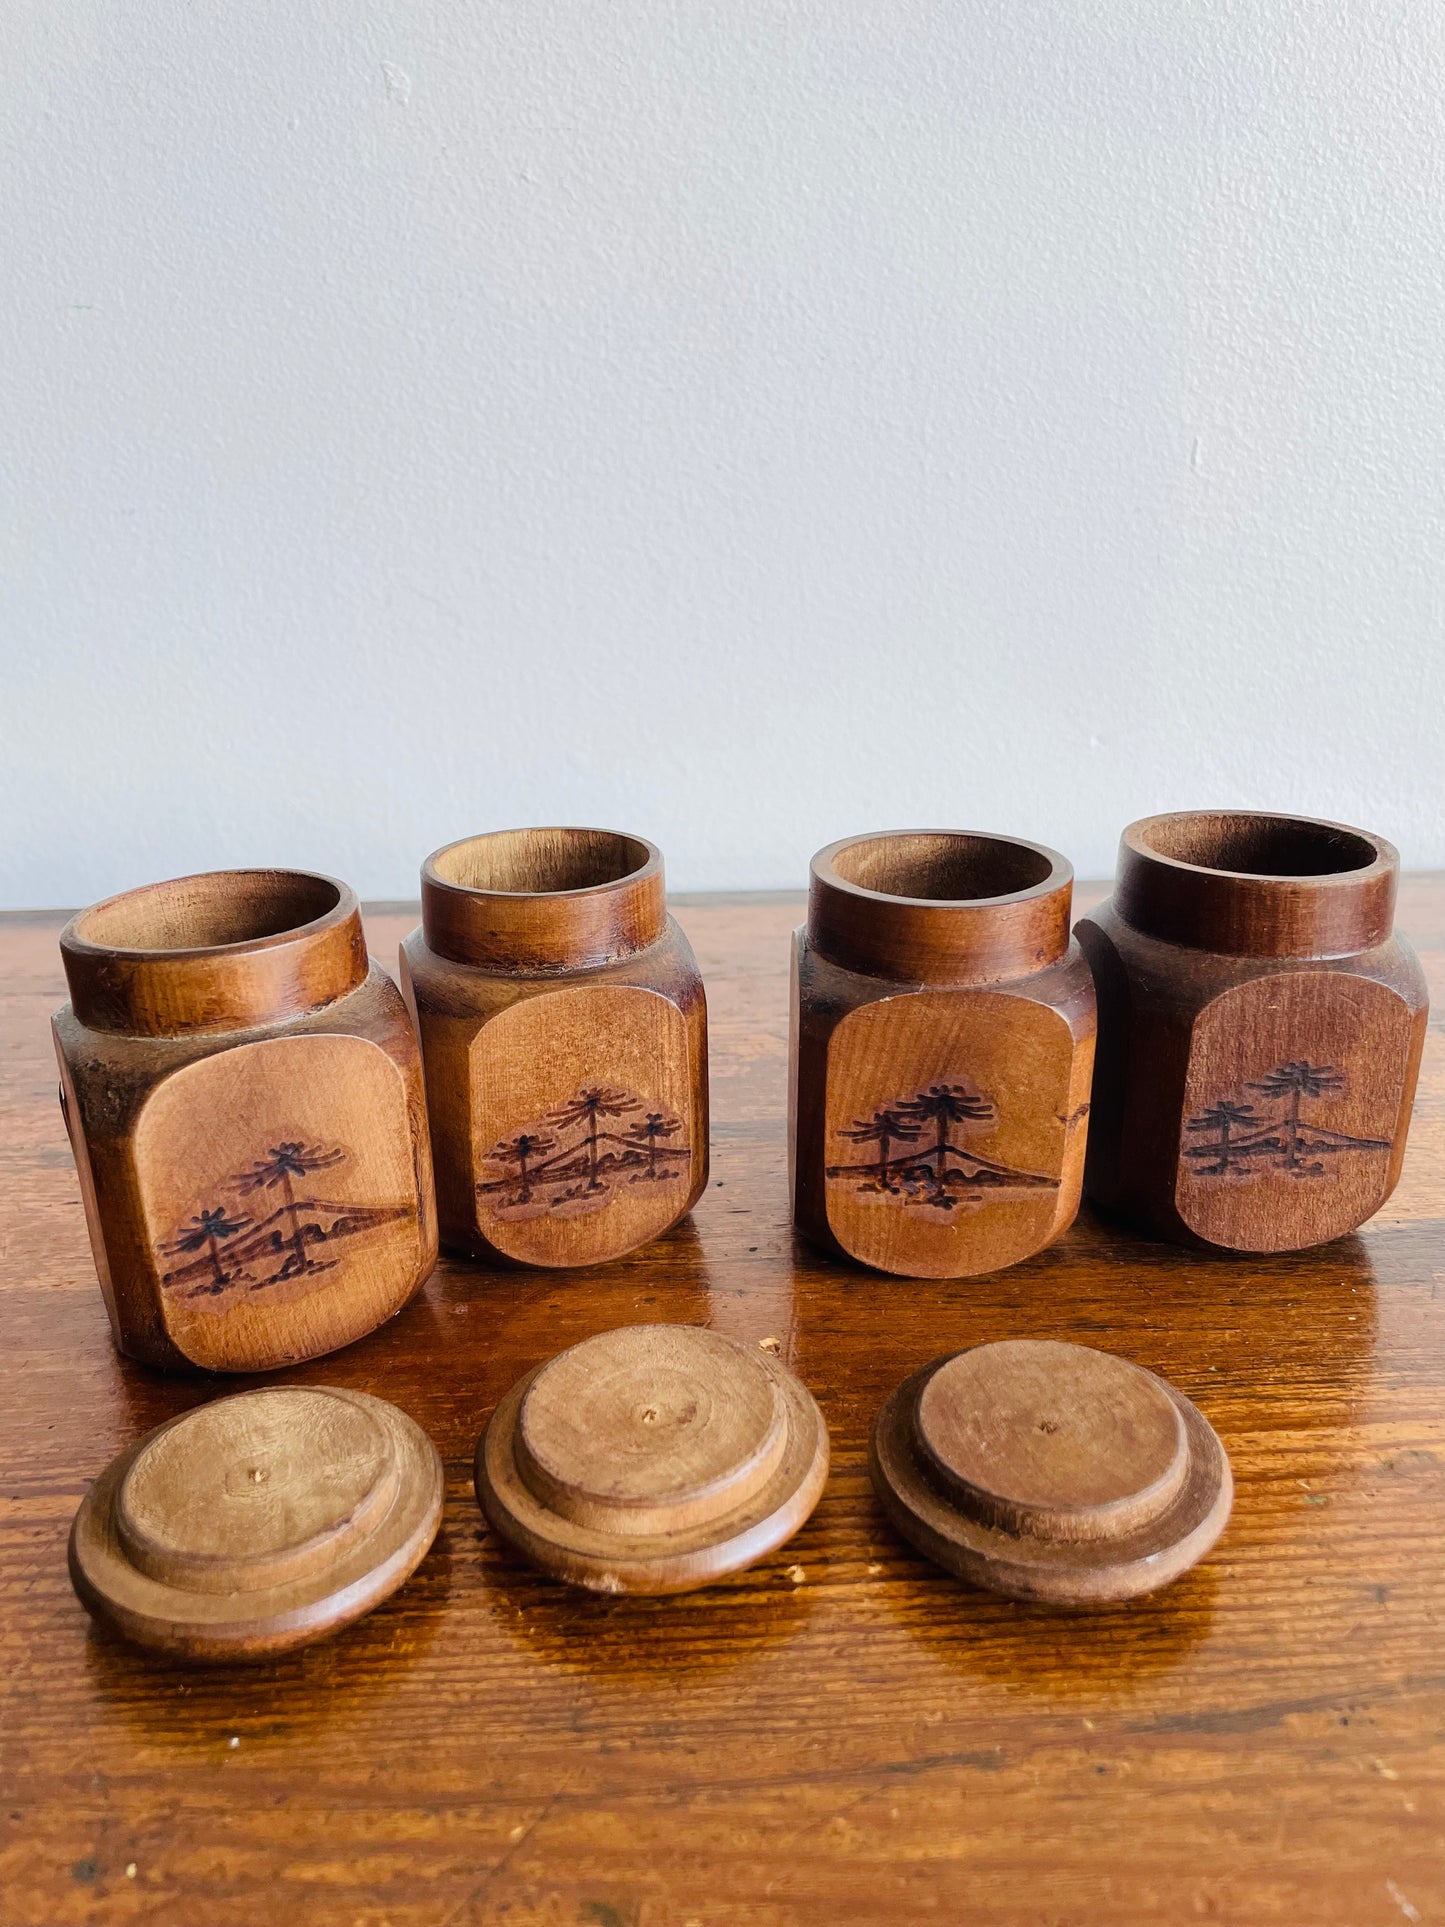 Miniature Wall Mount or Standing Shelf with Wooden Jars & Nature Scene - Makes a Great Spice Rack!